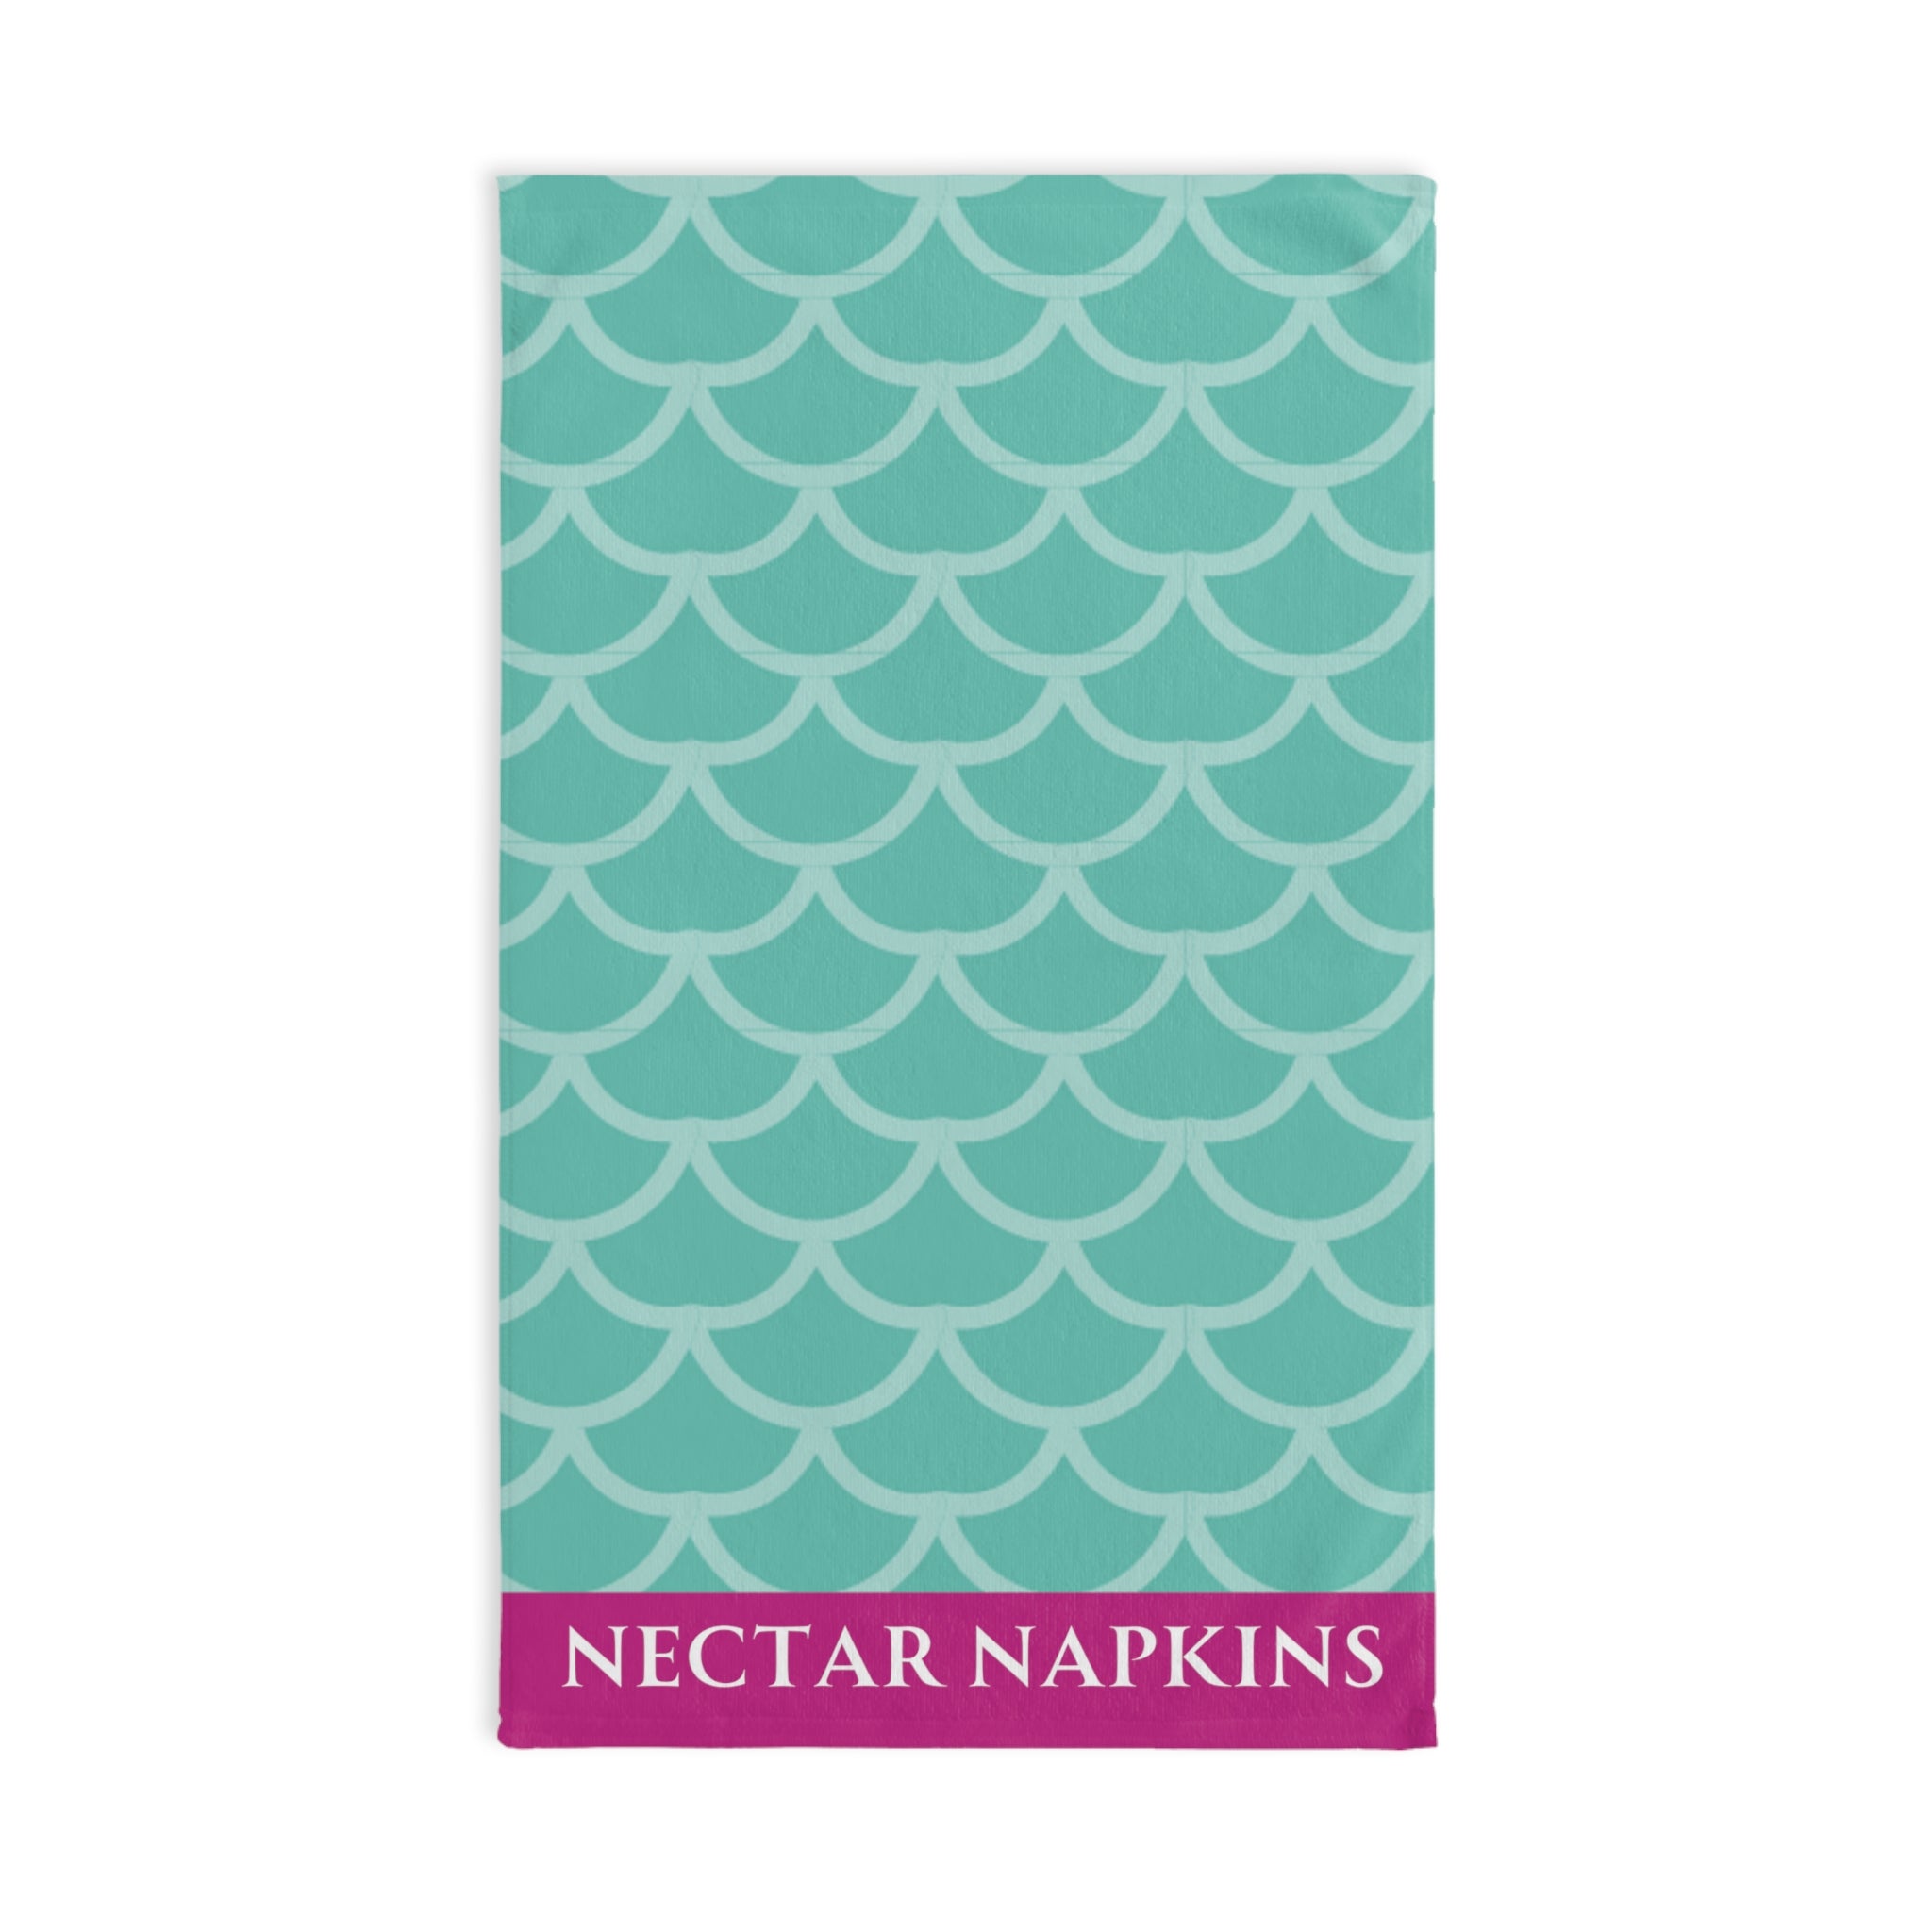 Mermaid Tail Mint Fuscia | Funny Gifts for Men - Gifts for Him - Birthday Gifts for Men, Him, Husband, Boyfriend, New Couple Gifts, Fathers & Valentines Day Gifts, Hand Towels NECTAR NAPKINS